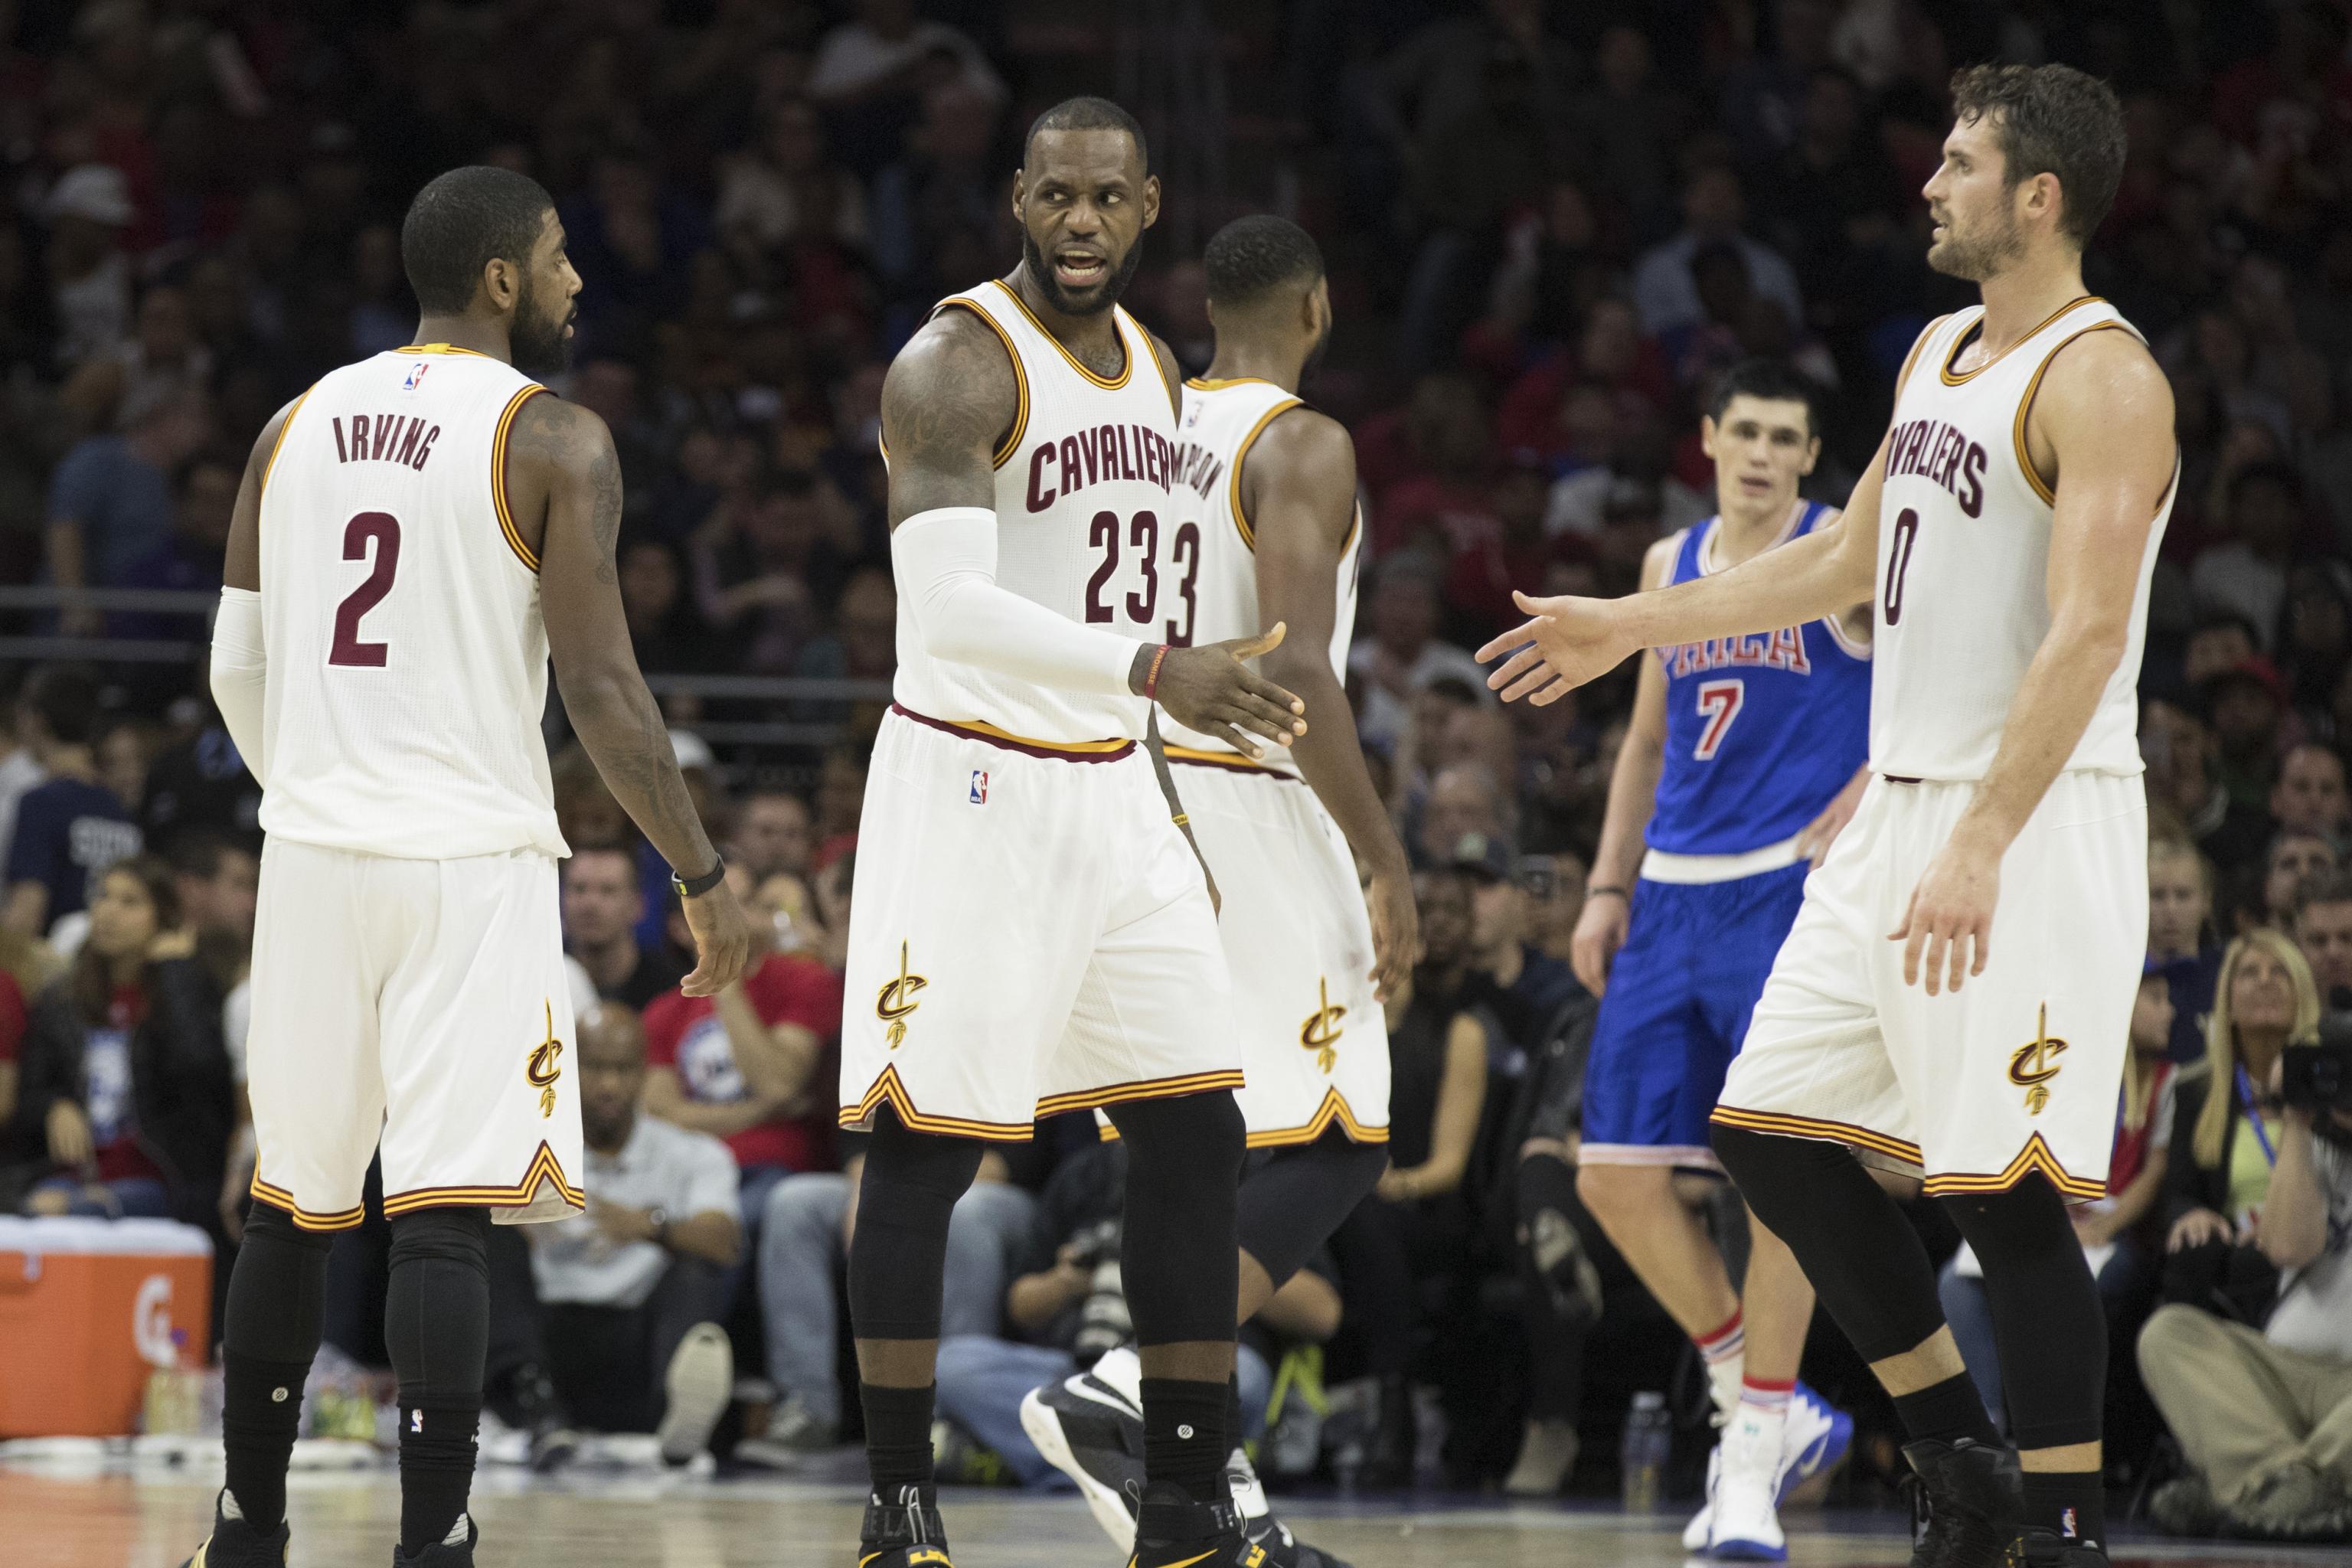 LeBron James chose sleeved jerseys for Cavs vs Warriors - Sports Illustrated